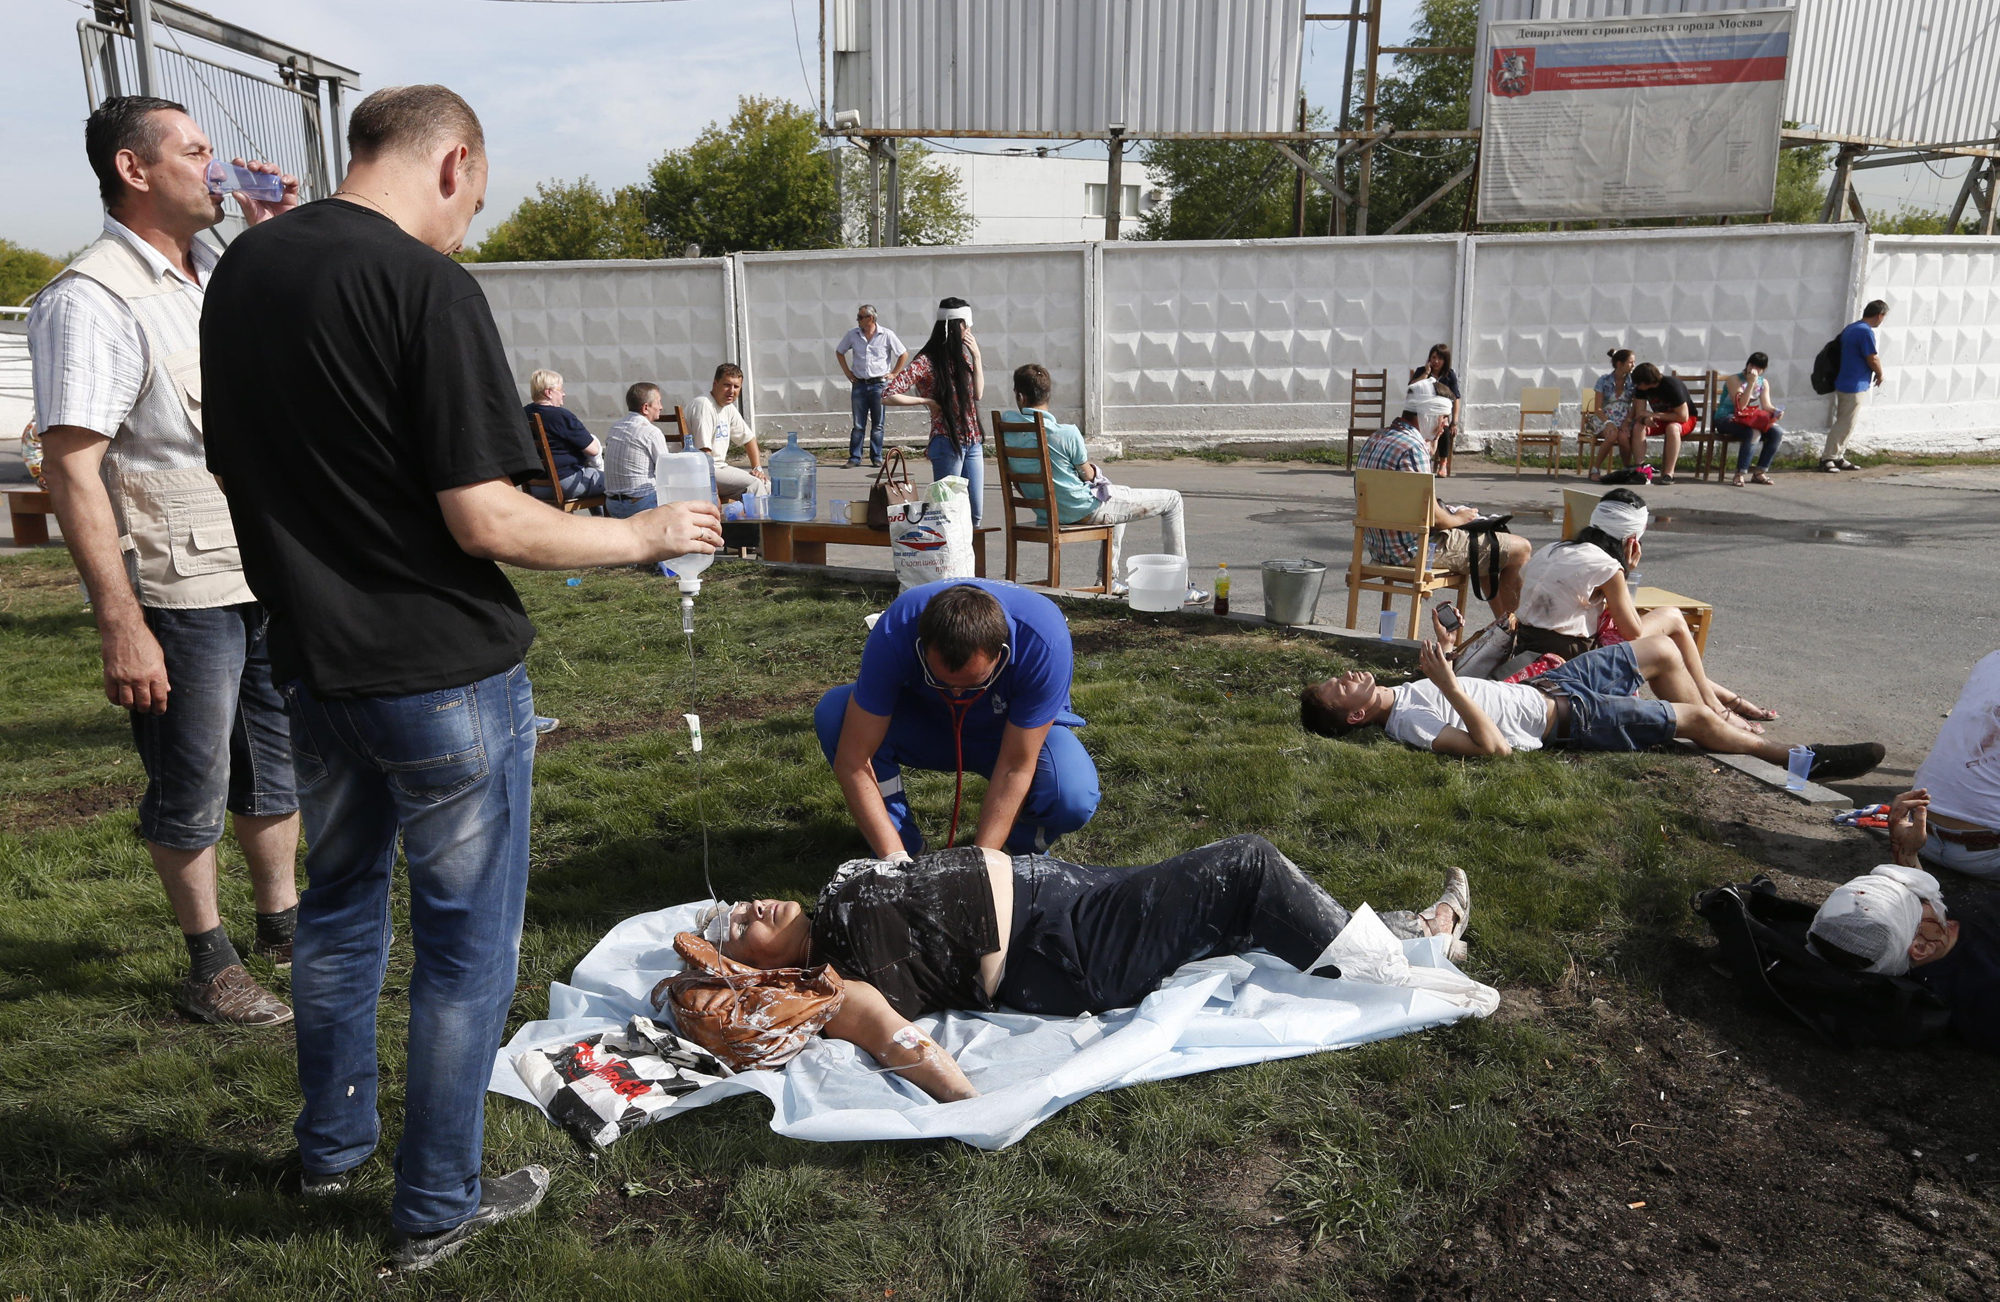 People injured in a Moscow metro derailment, July 15, 2014.